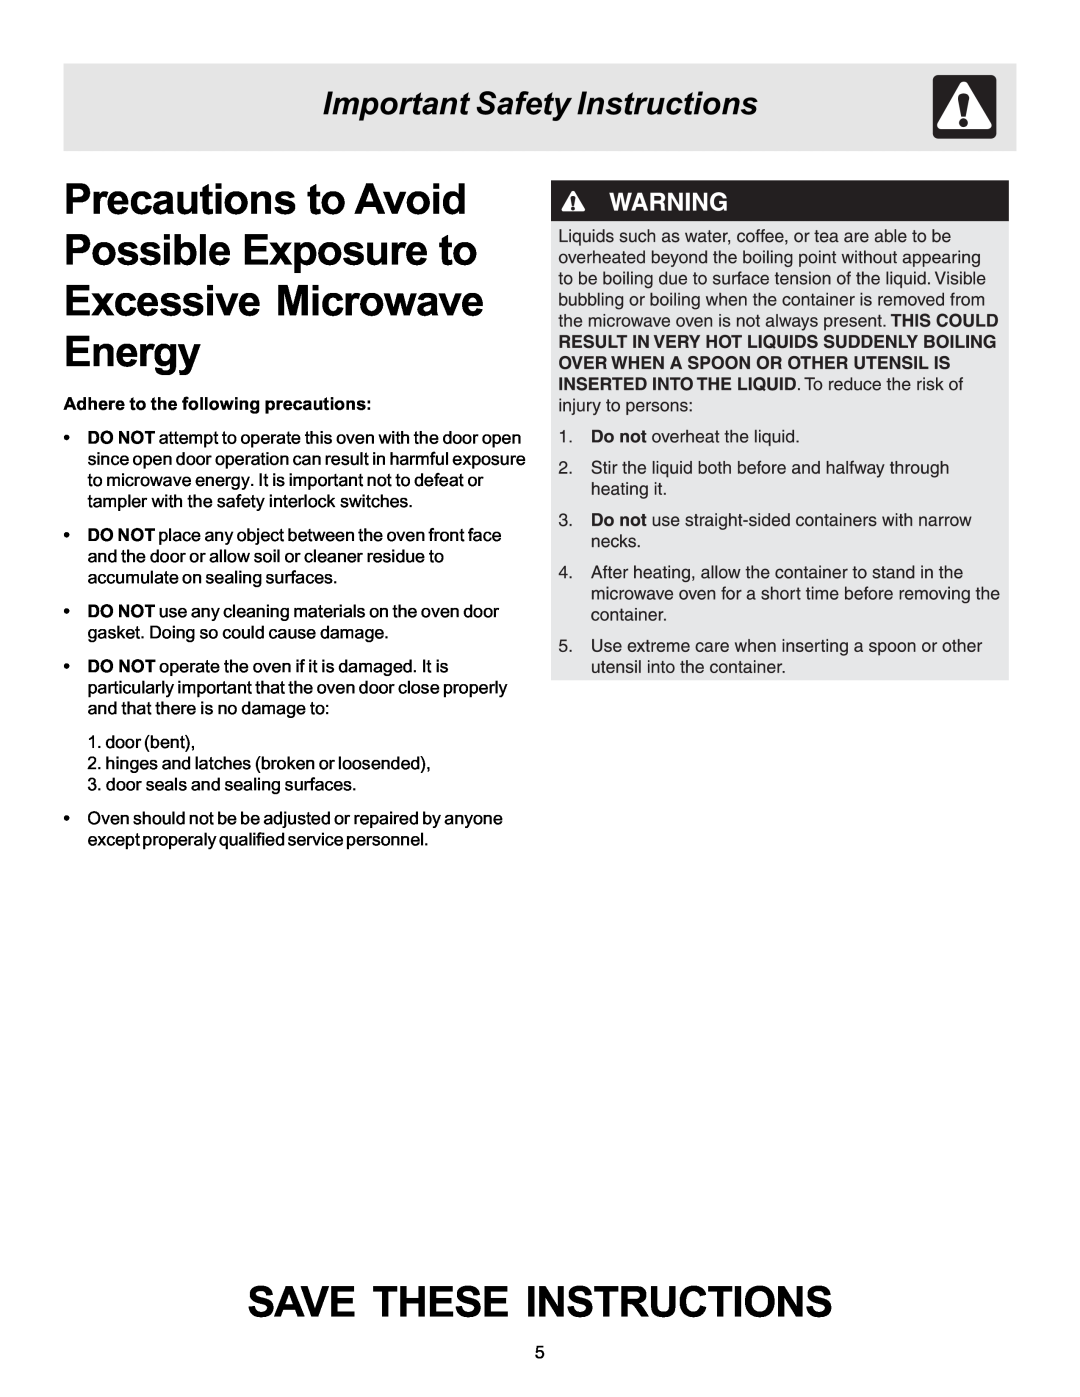 Frigidaire 316495002 manual Precautions to Avoid Possible Exposure to, Excessive Microwave Energy, Save These Instructions 